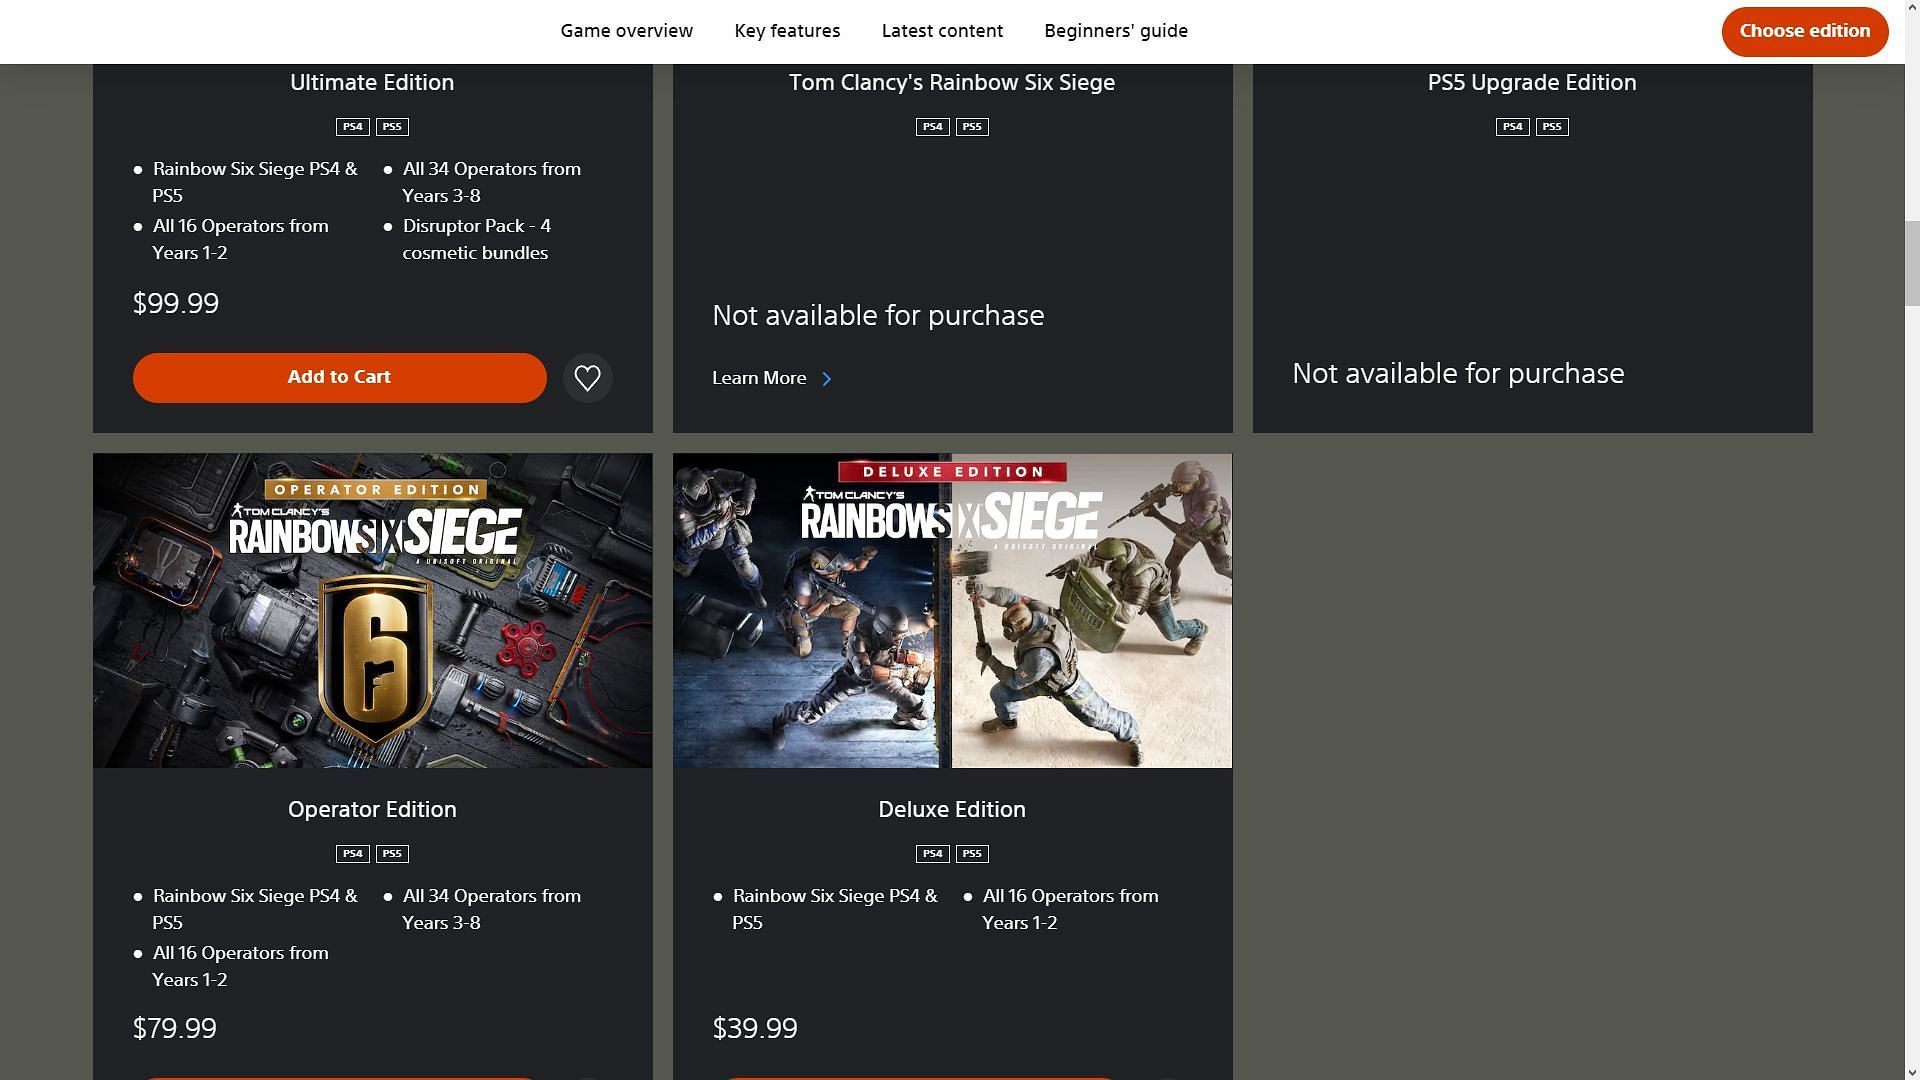 How much does Rainbow Six Siege cost on PlayStation? (Image via PlayStation Store)